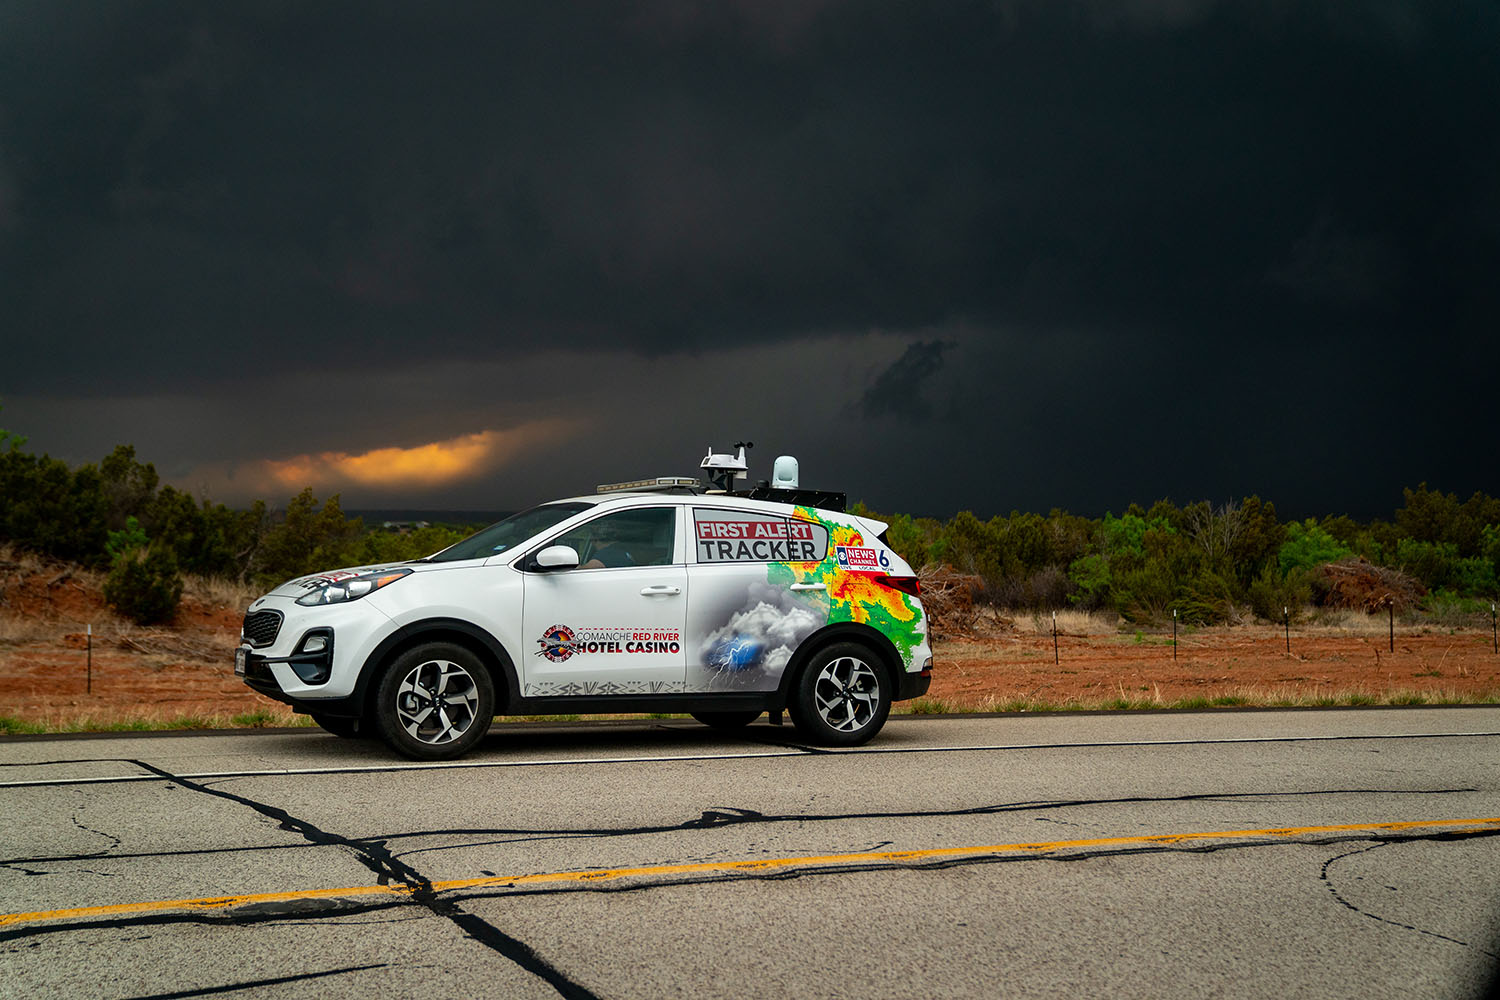 The students were not the only ones storm chasing, as the peak of tornado season is from May to early June. News weather vehicles were also out to report on the storms as they formed, like this one in Texas.